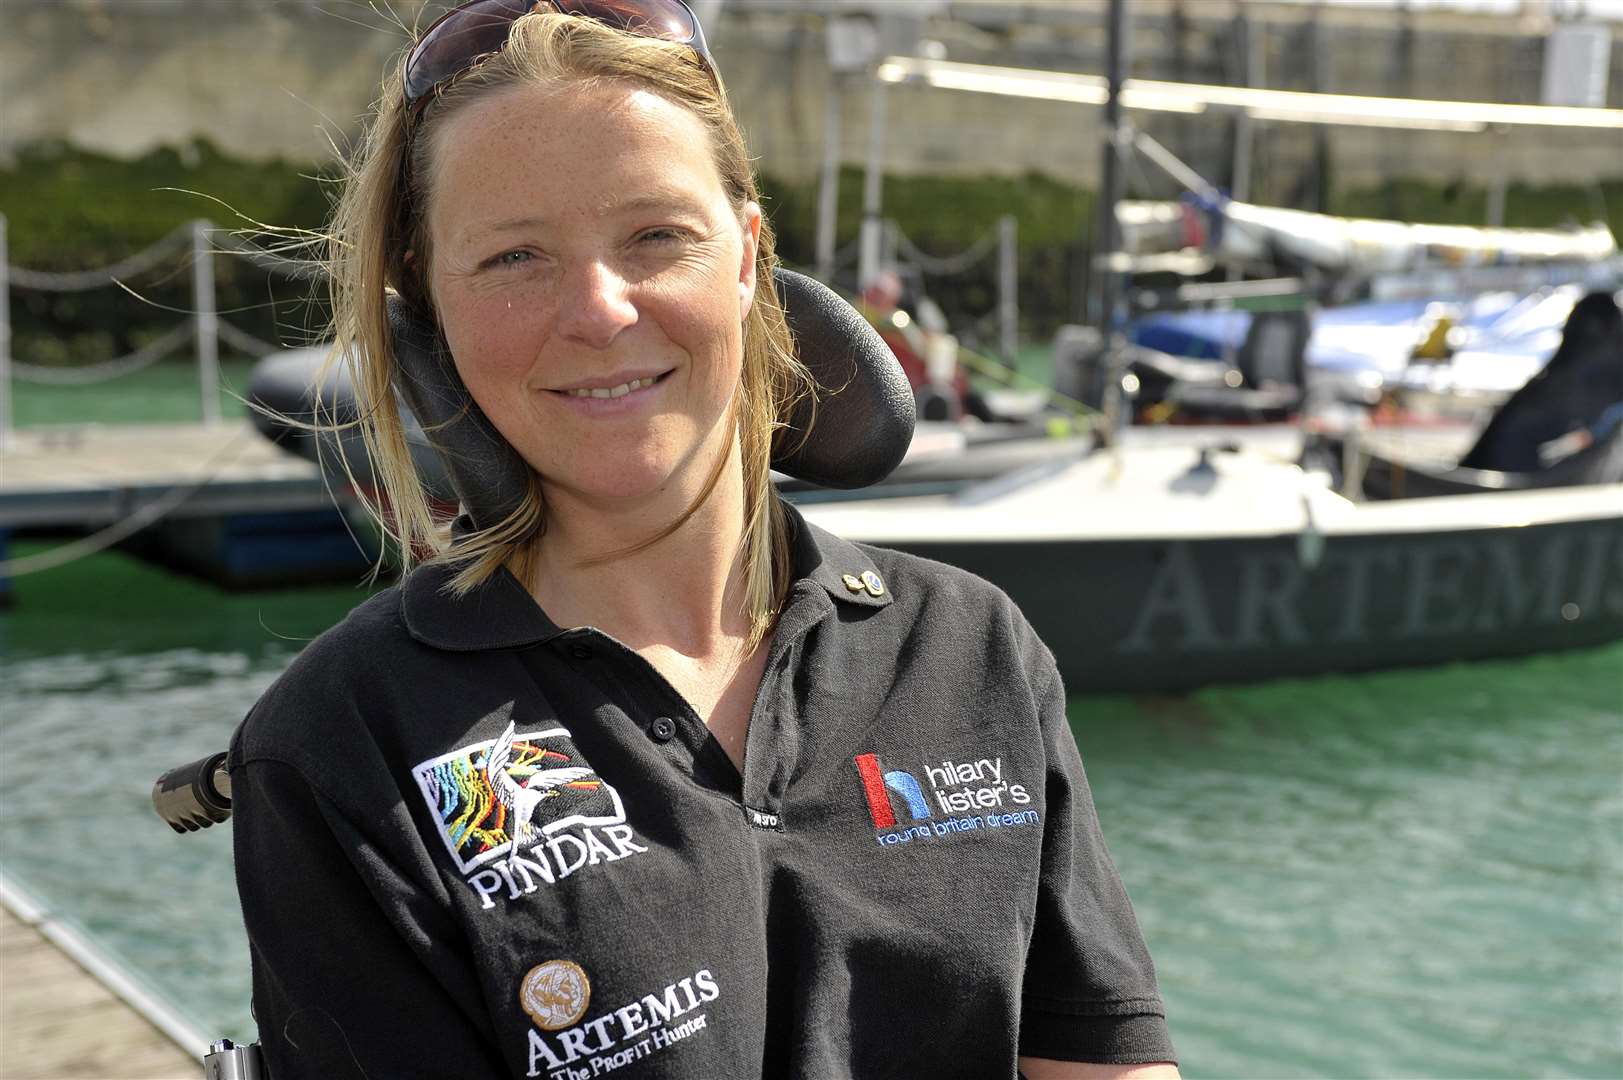 In 2009 Hilary became the first disabled woman to sail solo around Britain